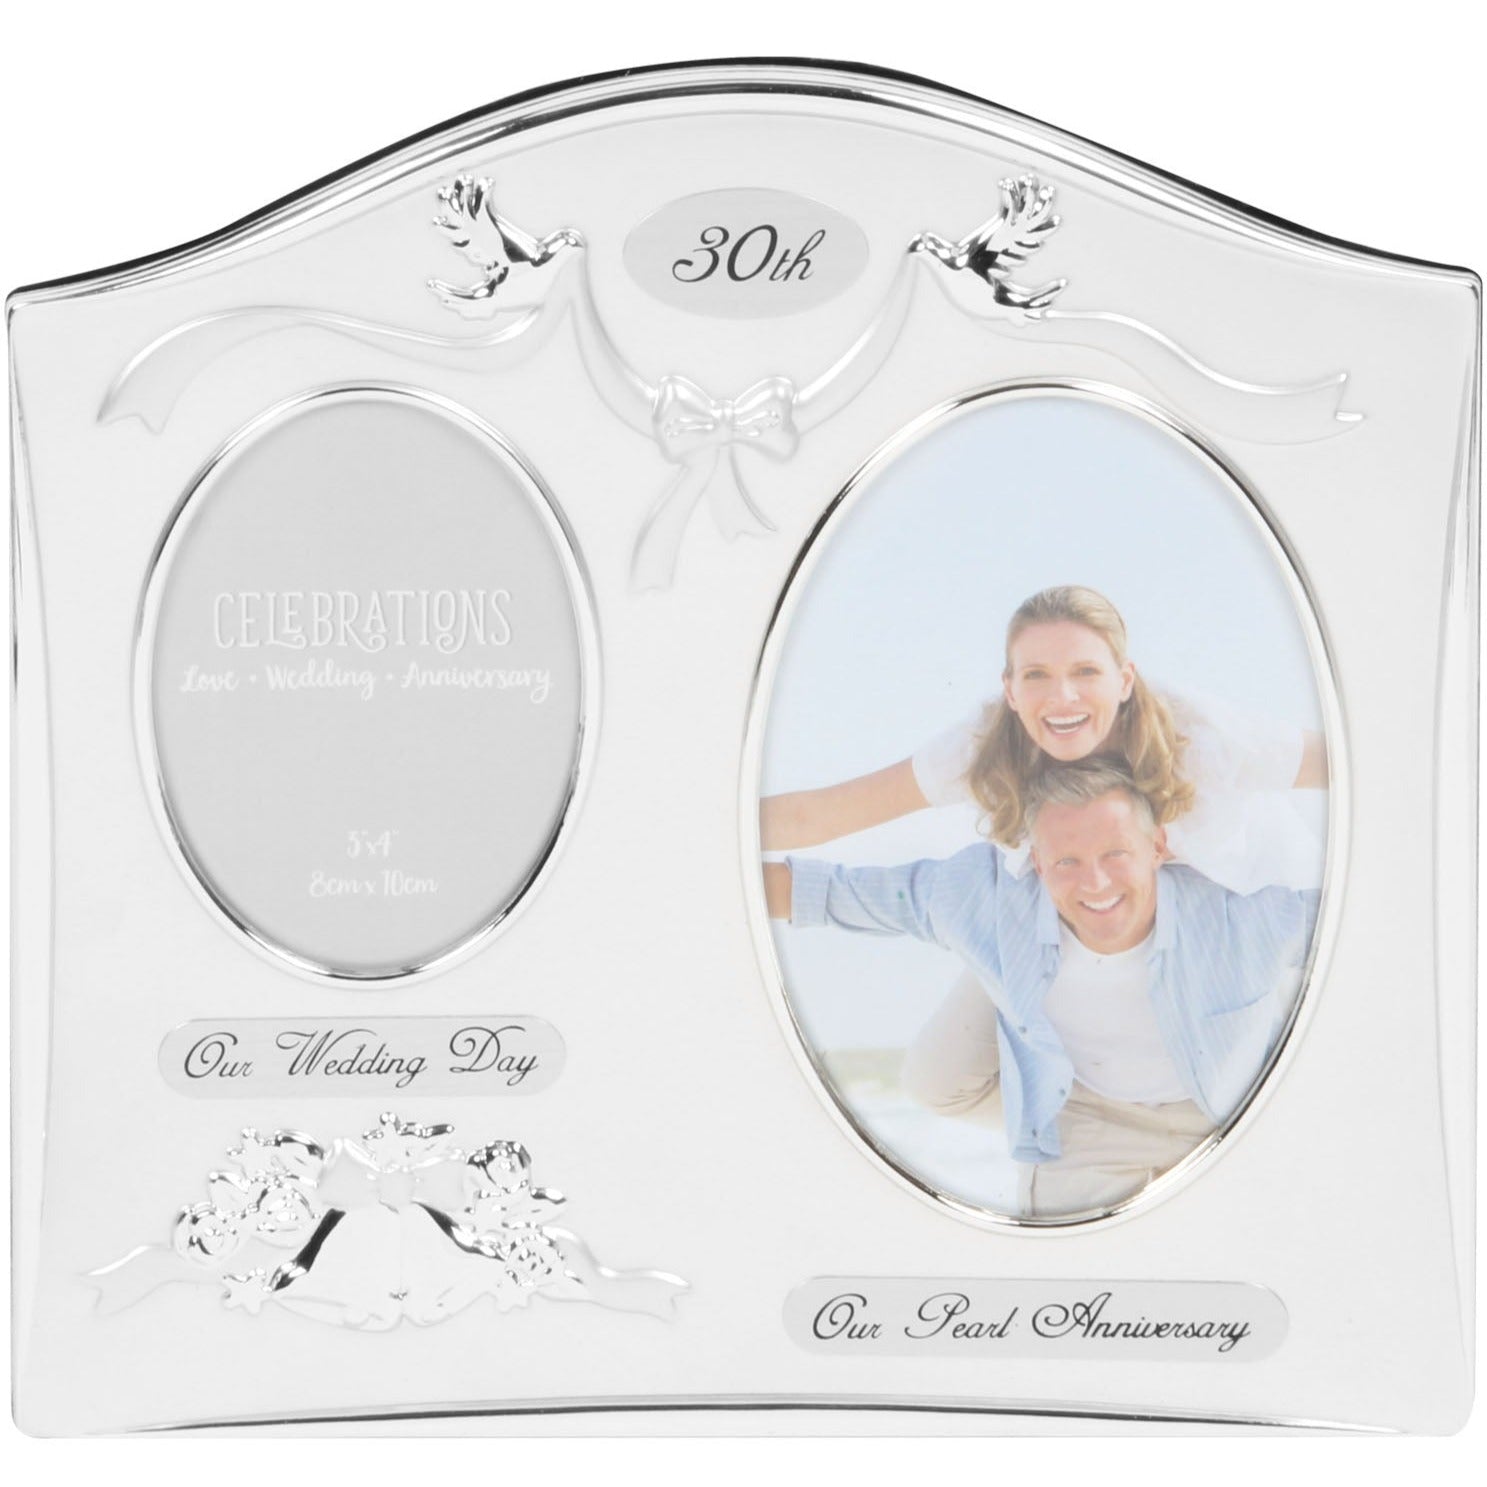 30th Anniversary Double Photo Frame 2 Tone - Silver Plated - Then and Now